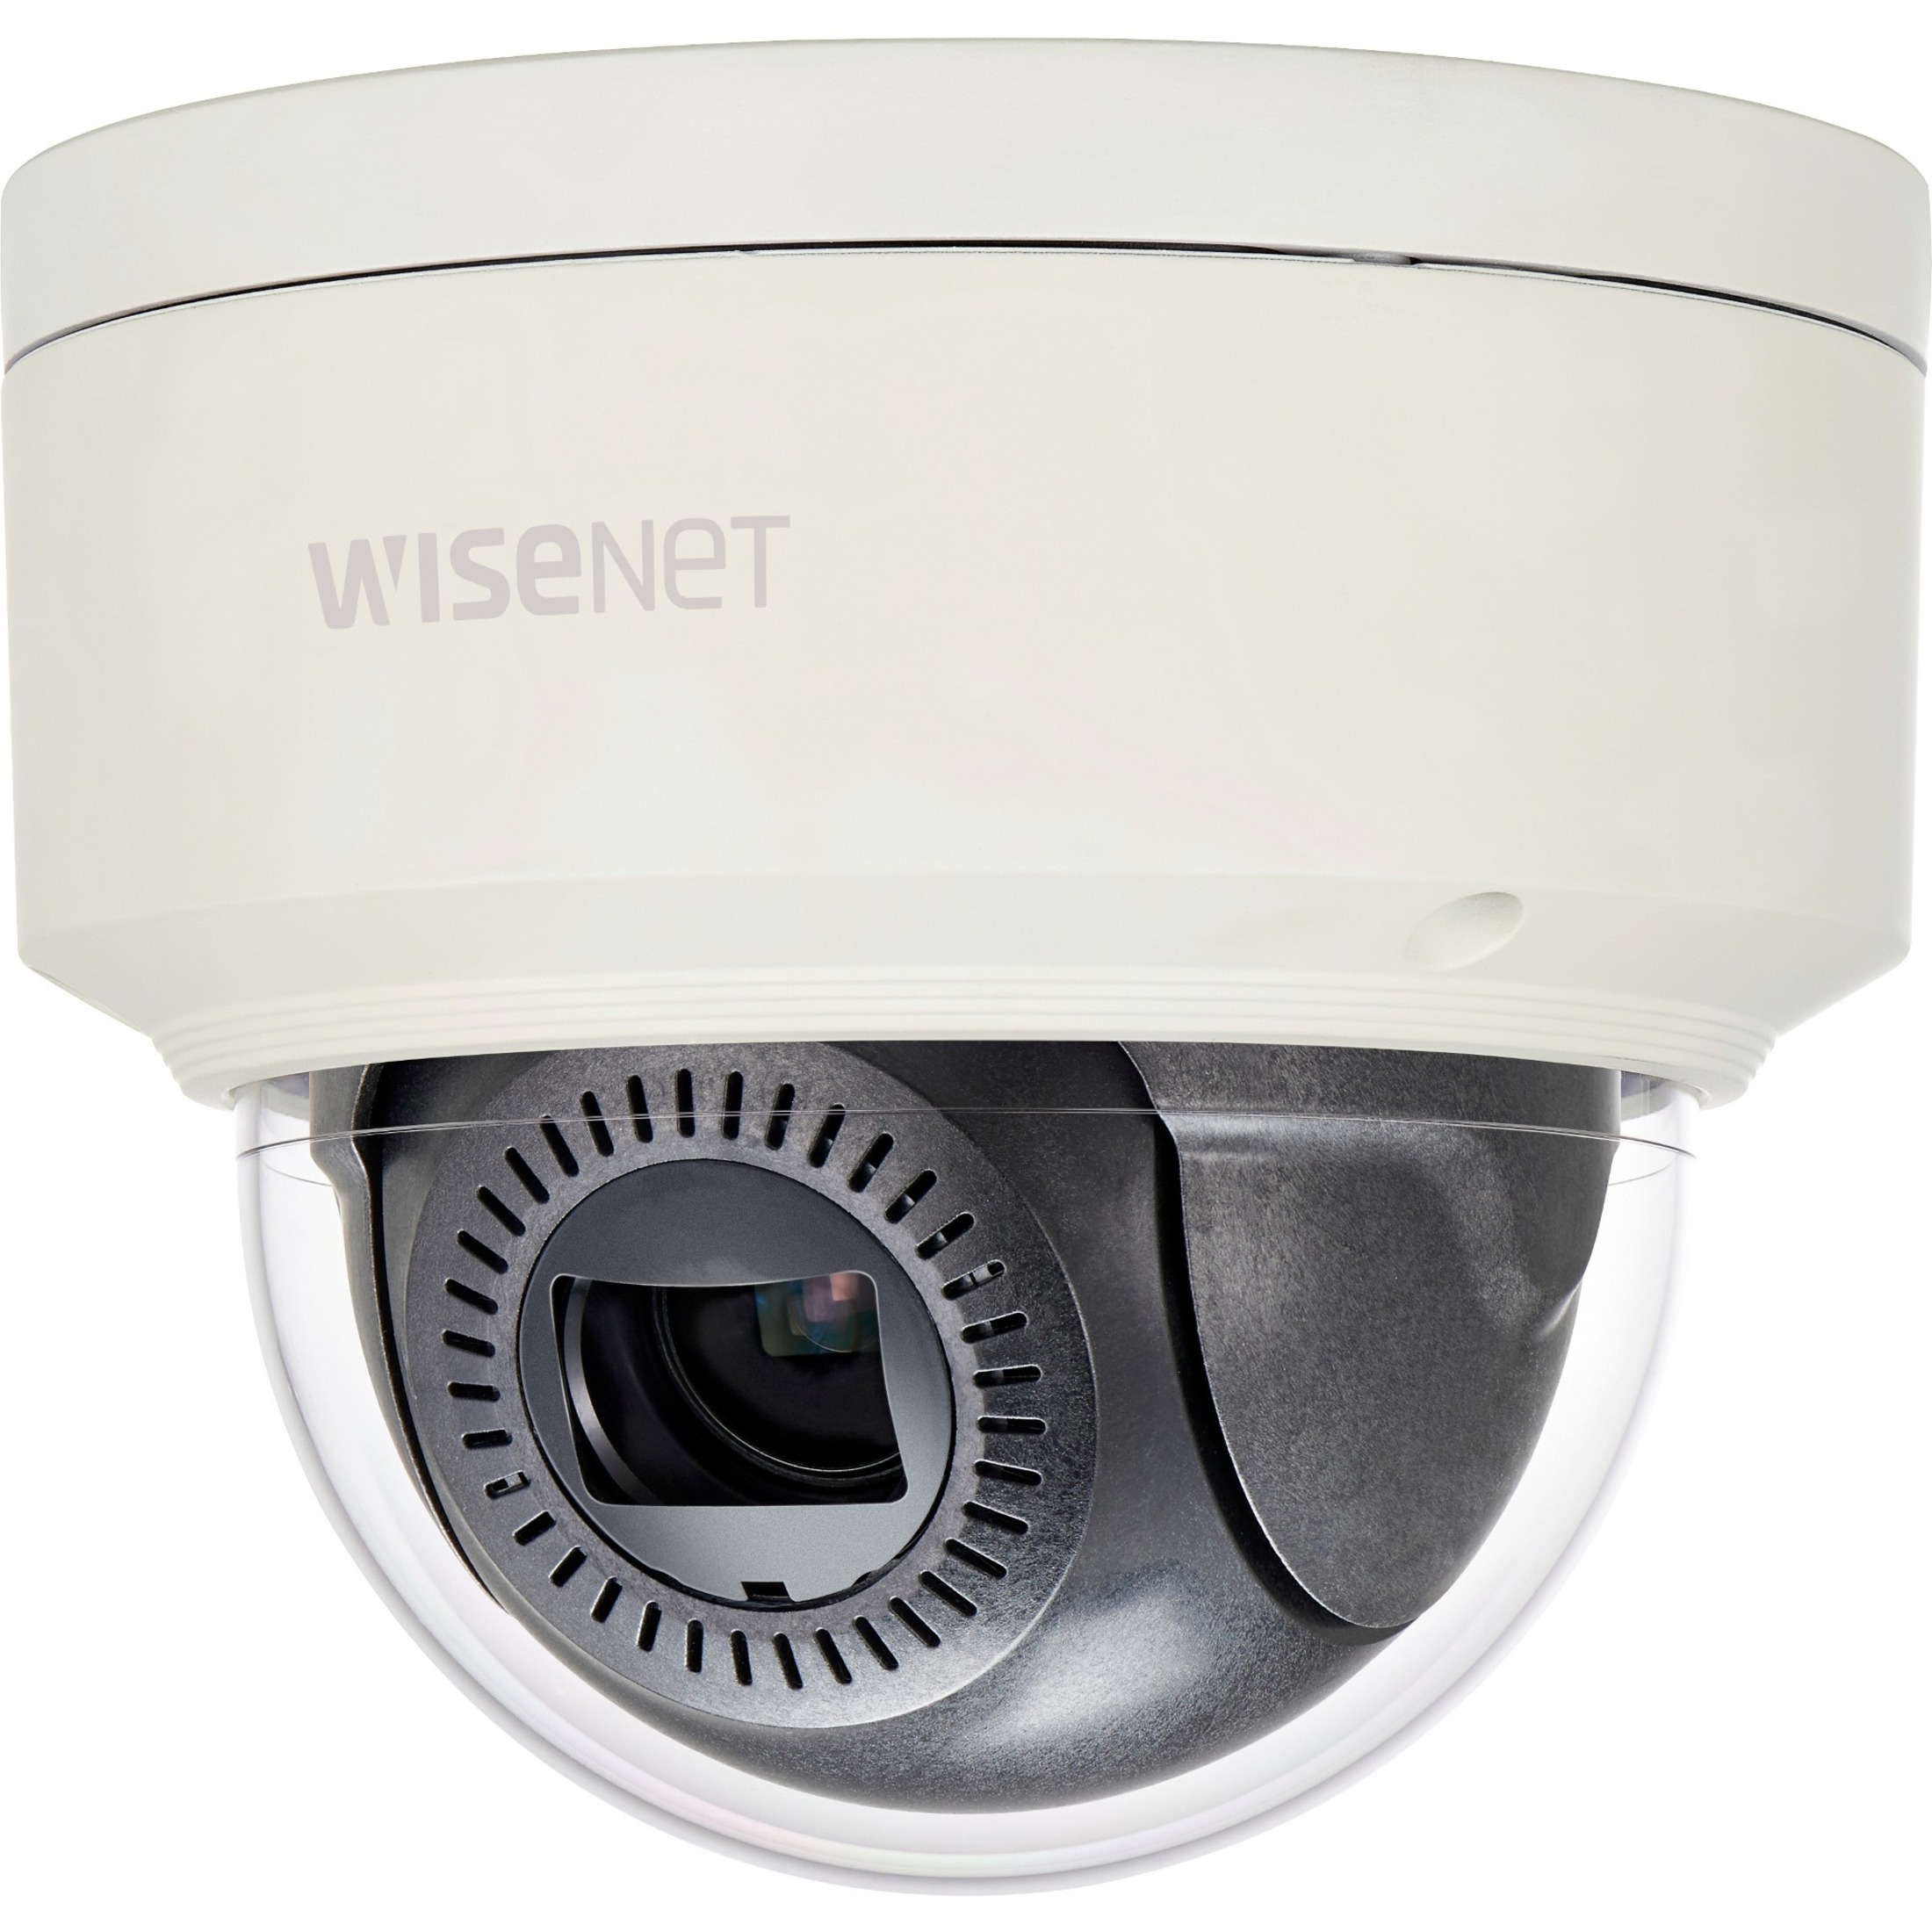 Wisenet extraLUX XNV-6085 2 Megapixel Outdoor Full HD Network Camera, Color, Dome, Ivory - image 1 of 2